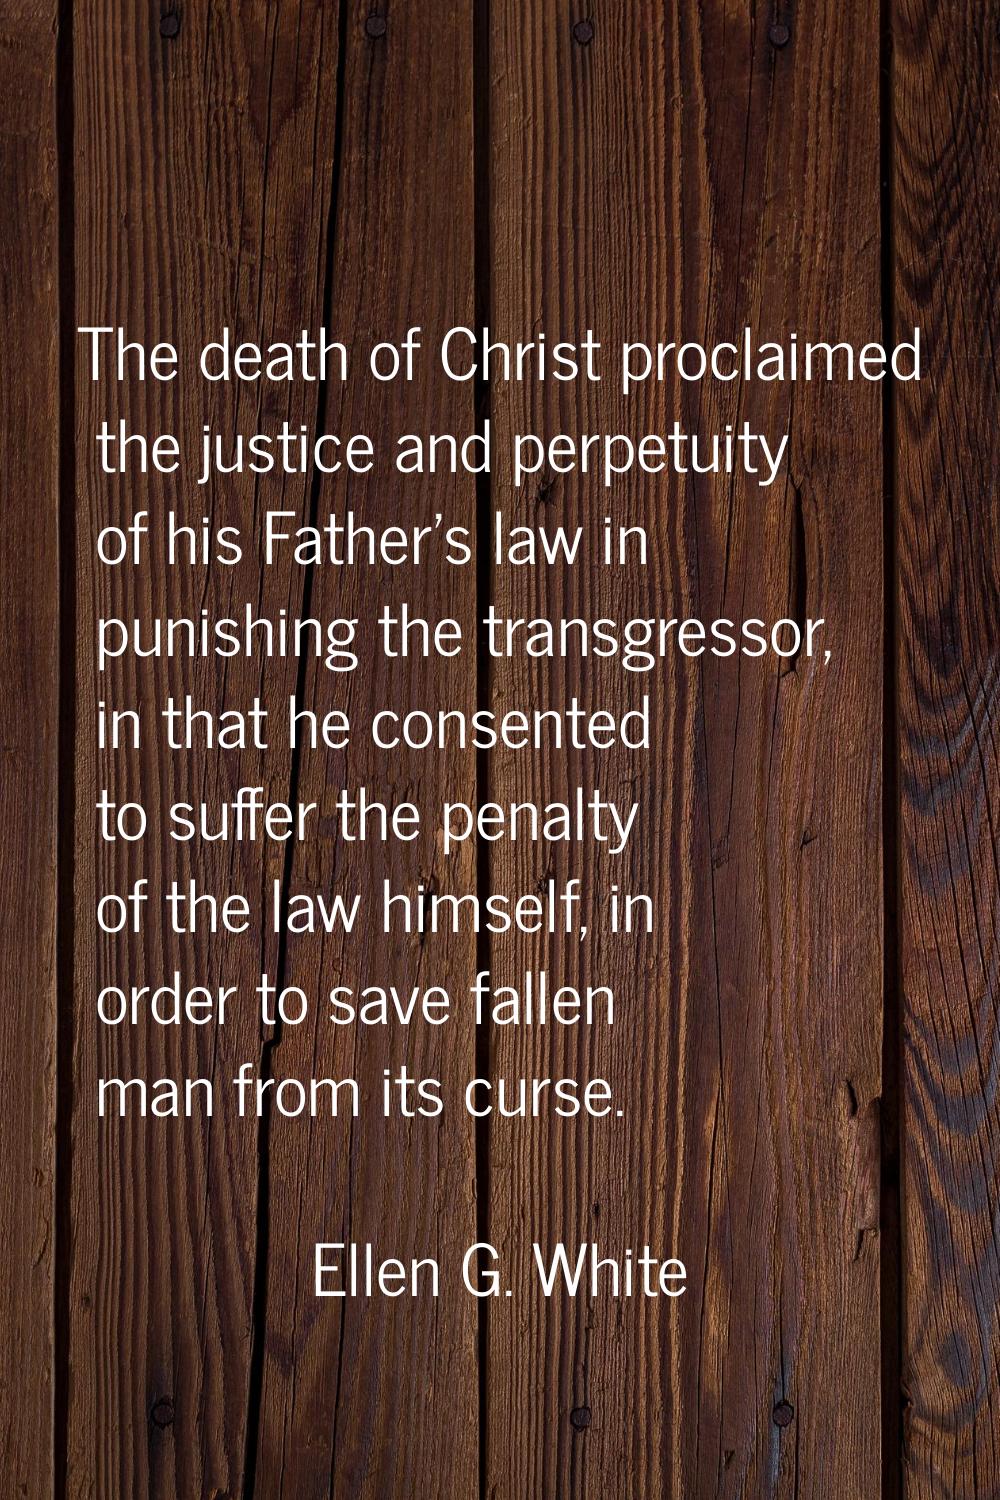 The death of Christ proclaimed the justice and perpetuity of his Father's law in punishing the tran